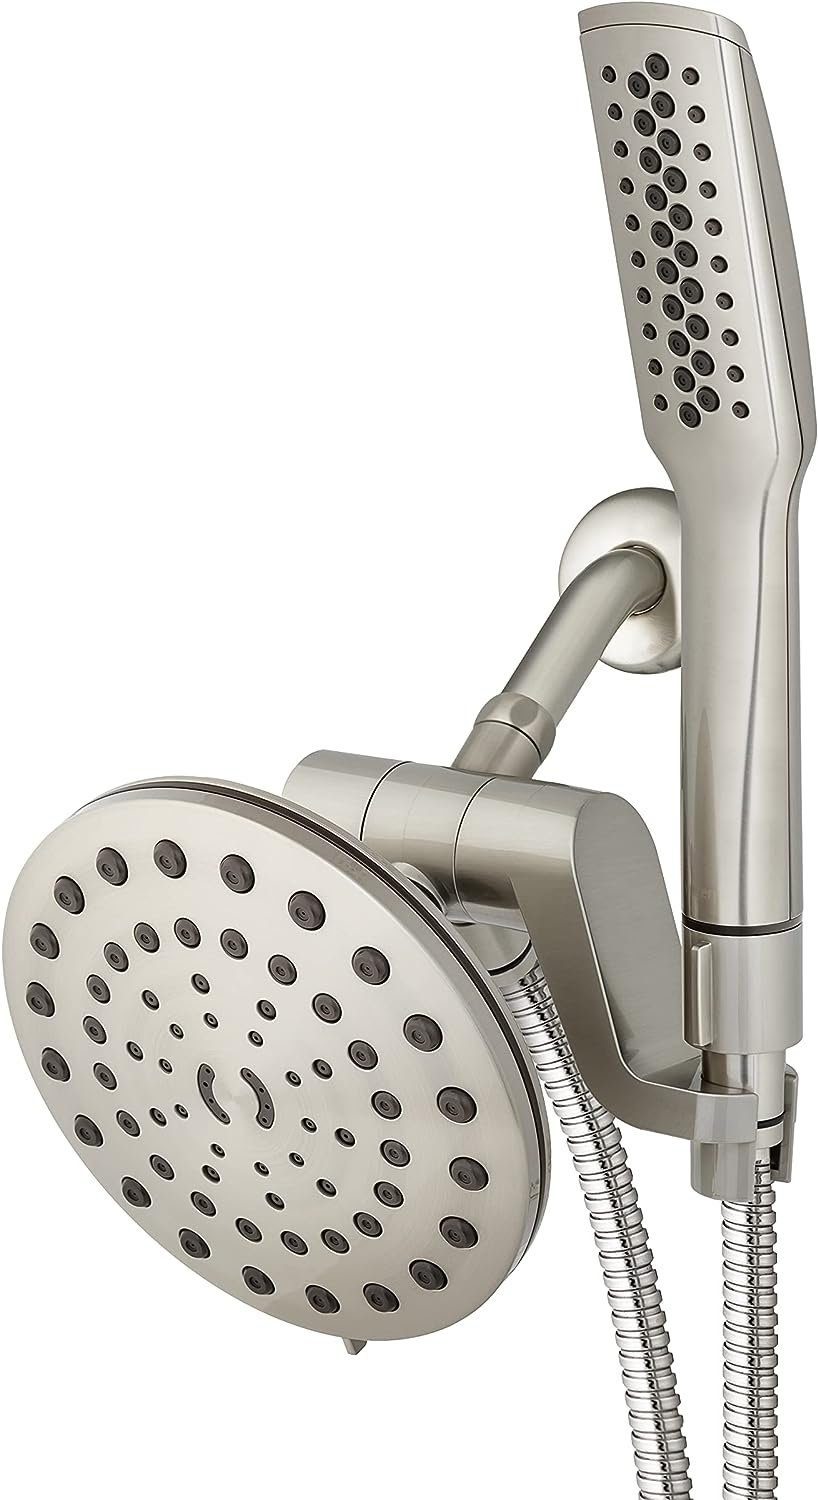 Waterpik High Pressure Pulsating Shower Wand and Rain Shower Head Combo with Extra-Long 8-Foot Metal Hose